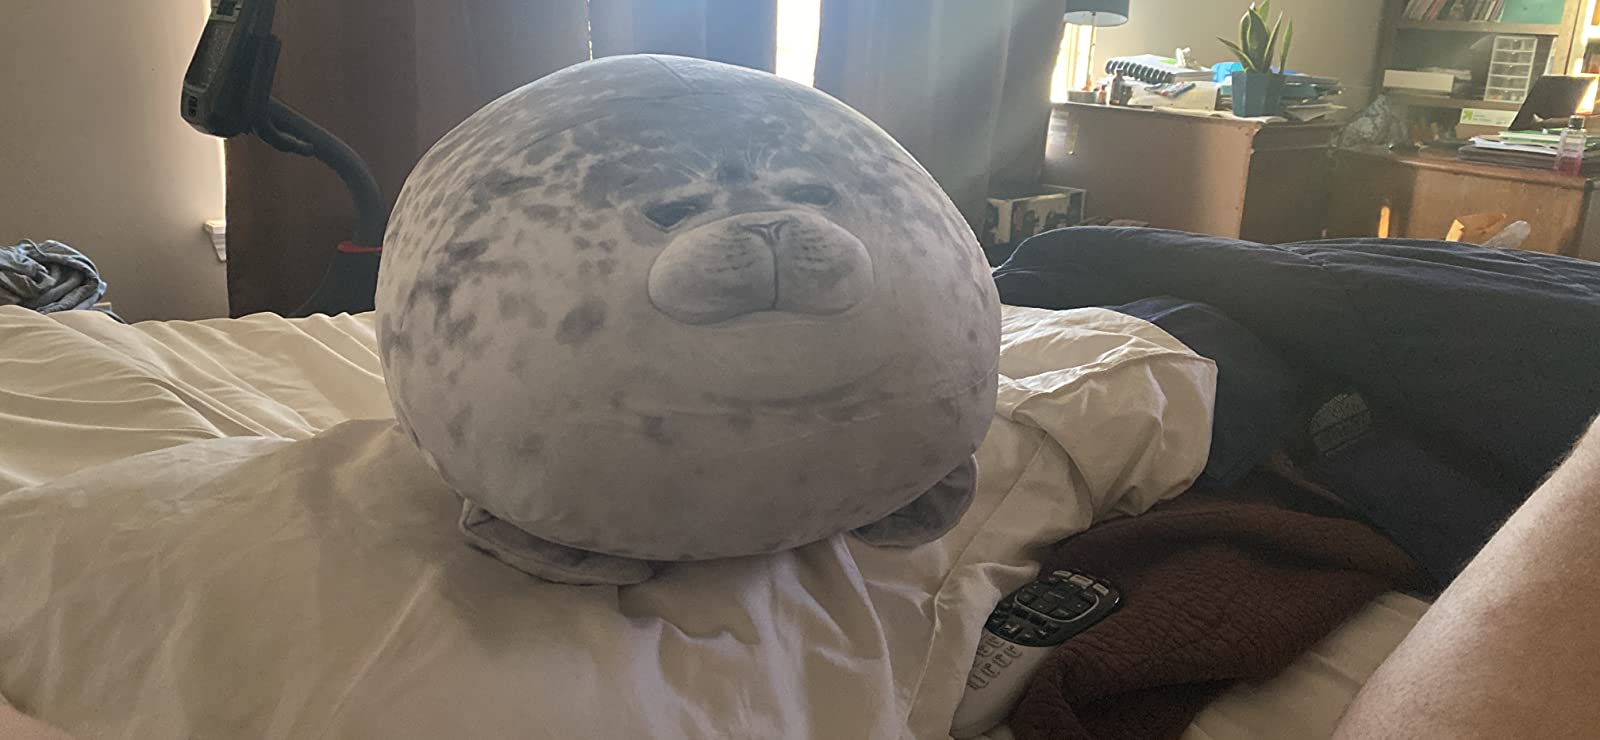 Giant 3D Blob Seal Pillow Soft Hugging Stuffed Cotton Plush Animal Toy photo review